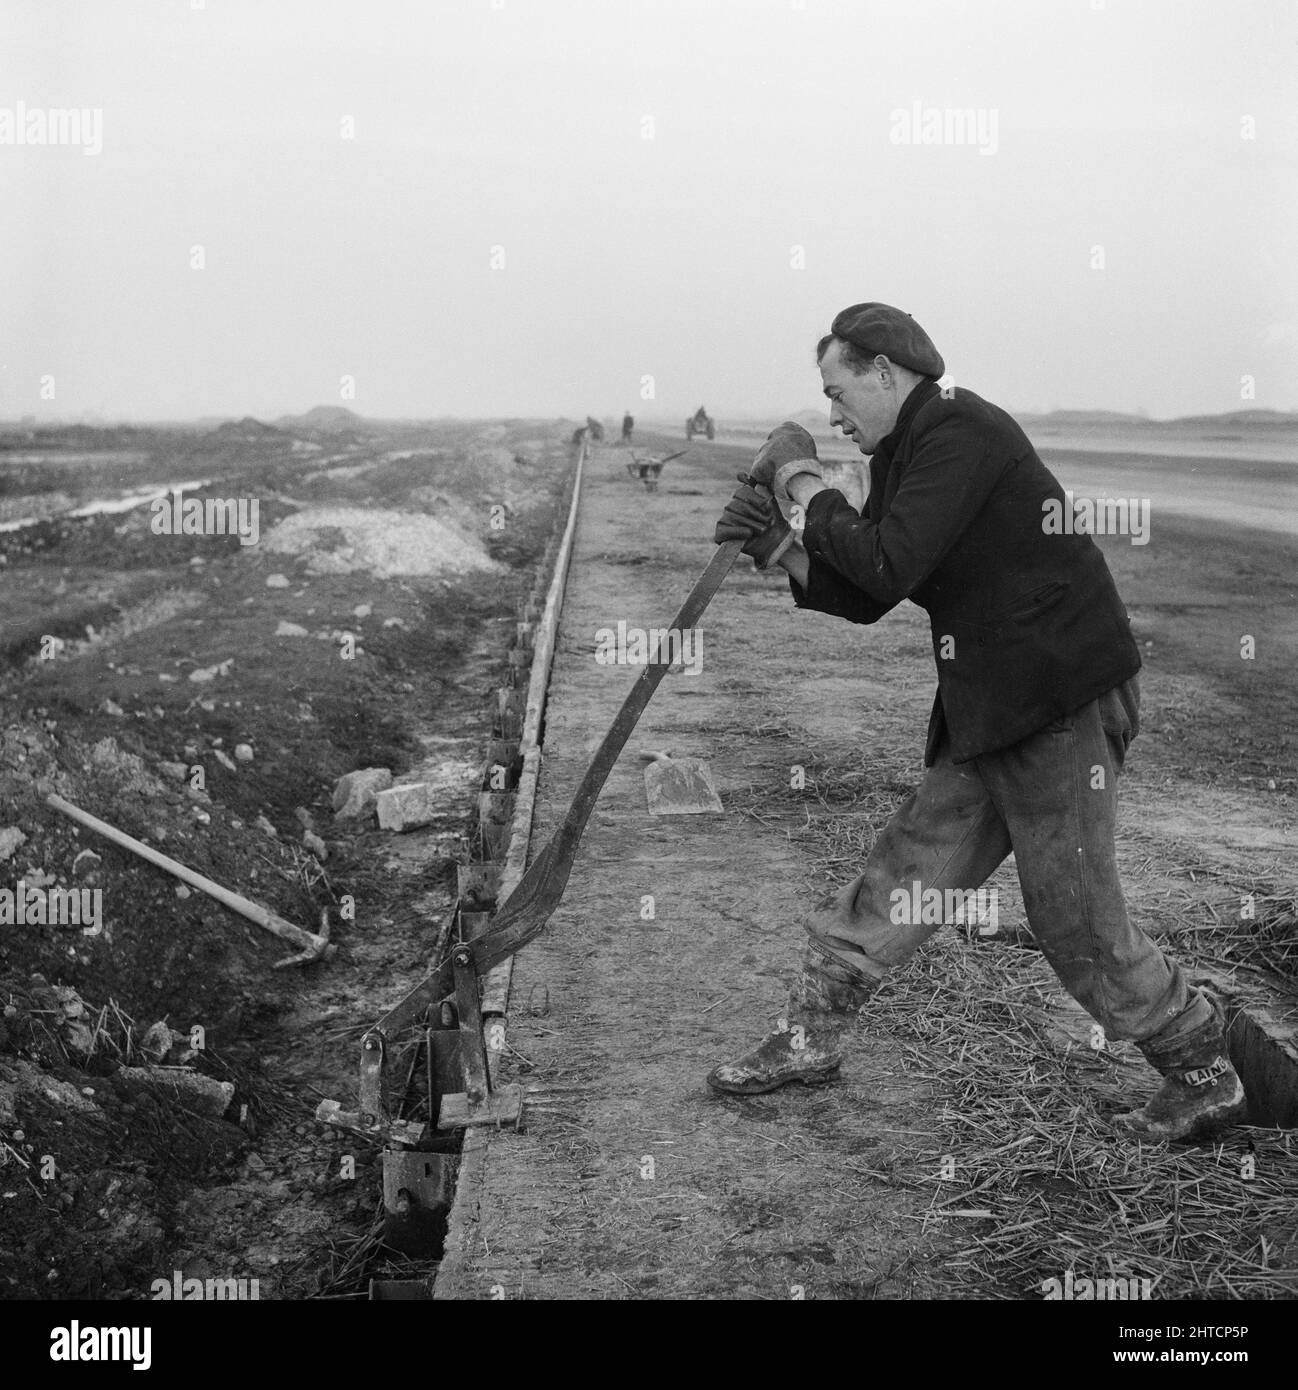 RAF Gaydon, Gaydon, Stratford-on-Avon, Warwickshire, 21/01/1953. A man working during the construction of Gaydon Airfield, using a lever tool to remove a rivet fastening from shuttering formwork running along the edge of the runway. Work began on the construction of a runway at Gaydon Airfield in early 1952. As part of the project, a former runway, largely abandoned following the Second World War, was superseded by a newly constructed runway nearly 1 3/4 miles long and 200 feet wide. Also built were access tracks and a taxi-track. Stock Photo